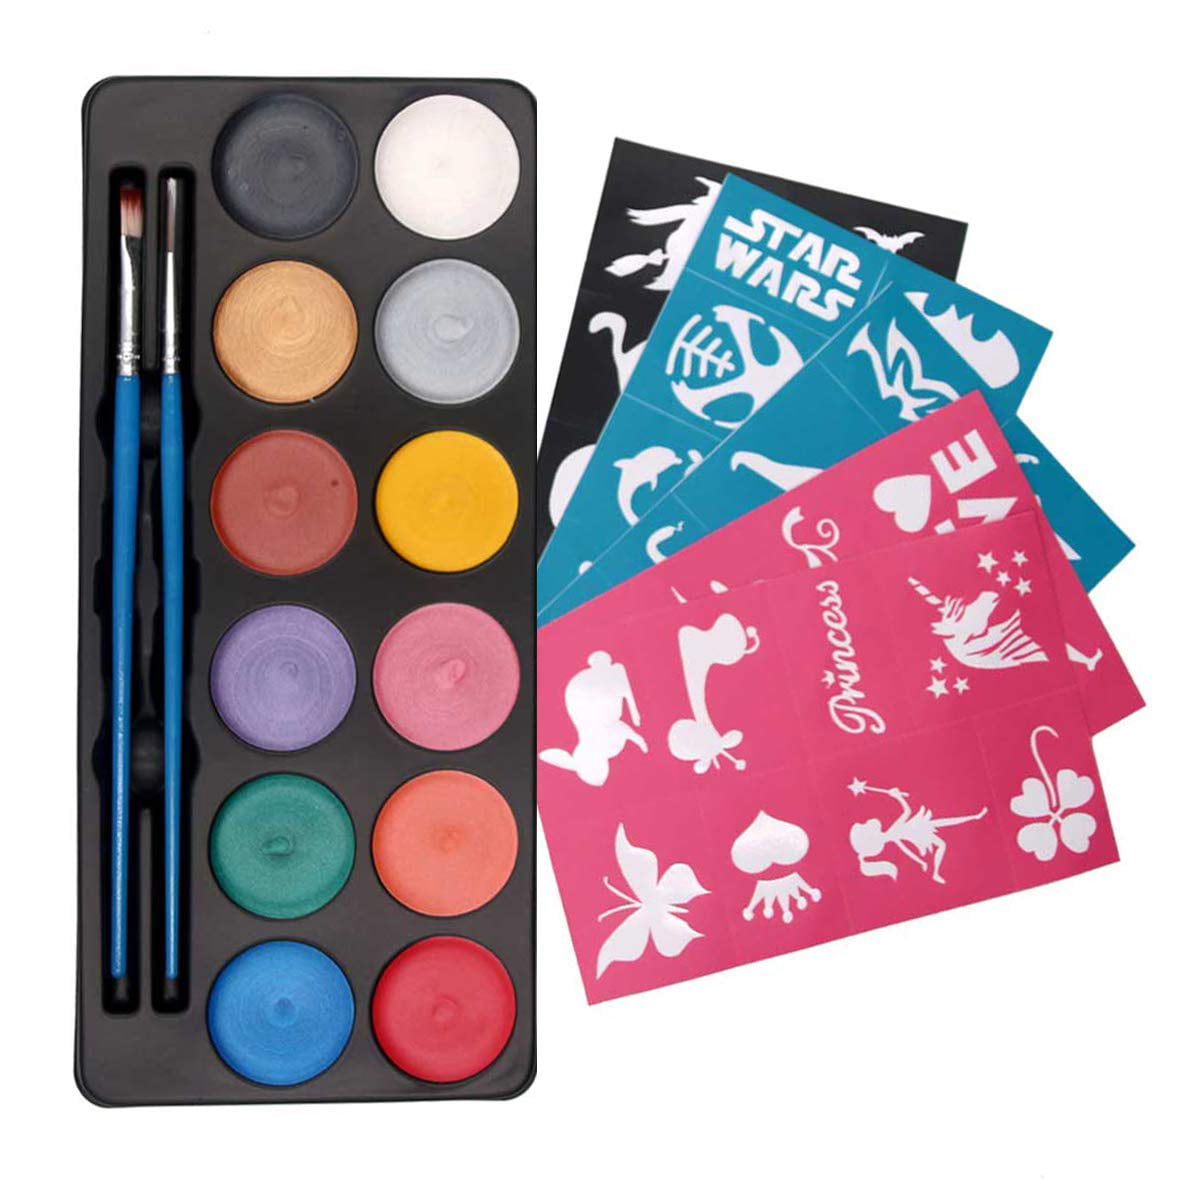 Maydear Face Painting Kit for Kids - 20 Colors Water Based Makeup Palette  with Stencils, Glitters, Rainbow